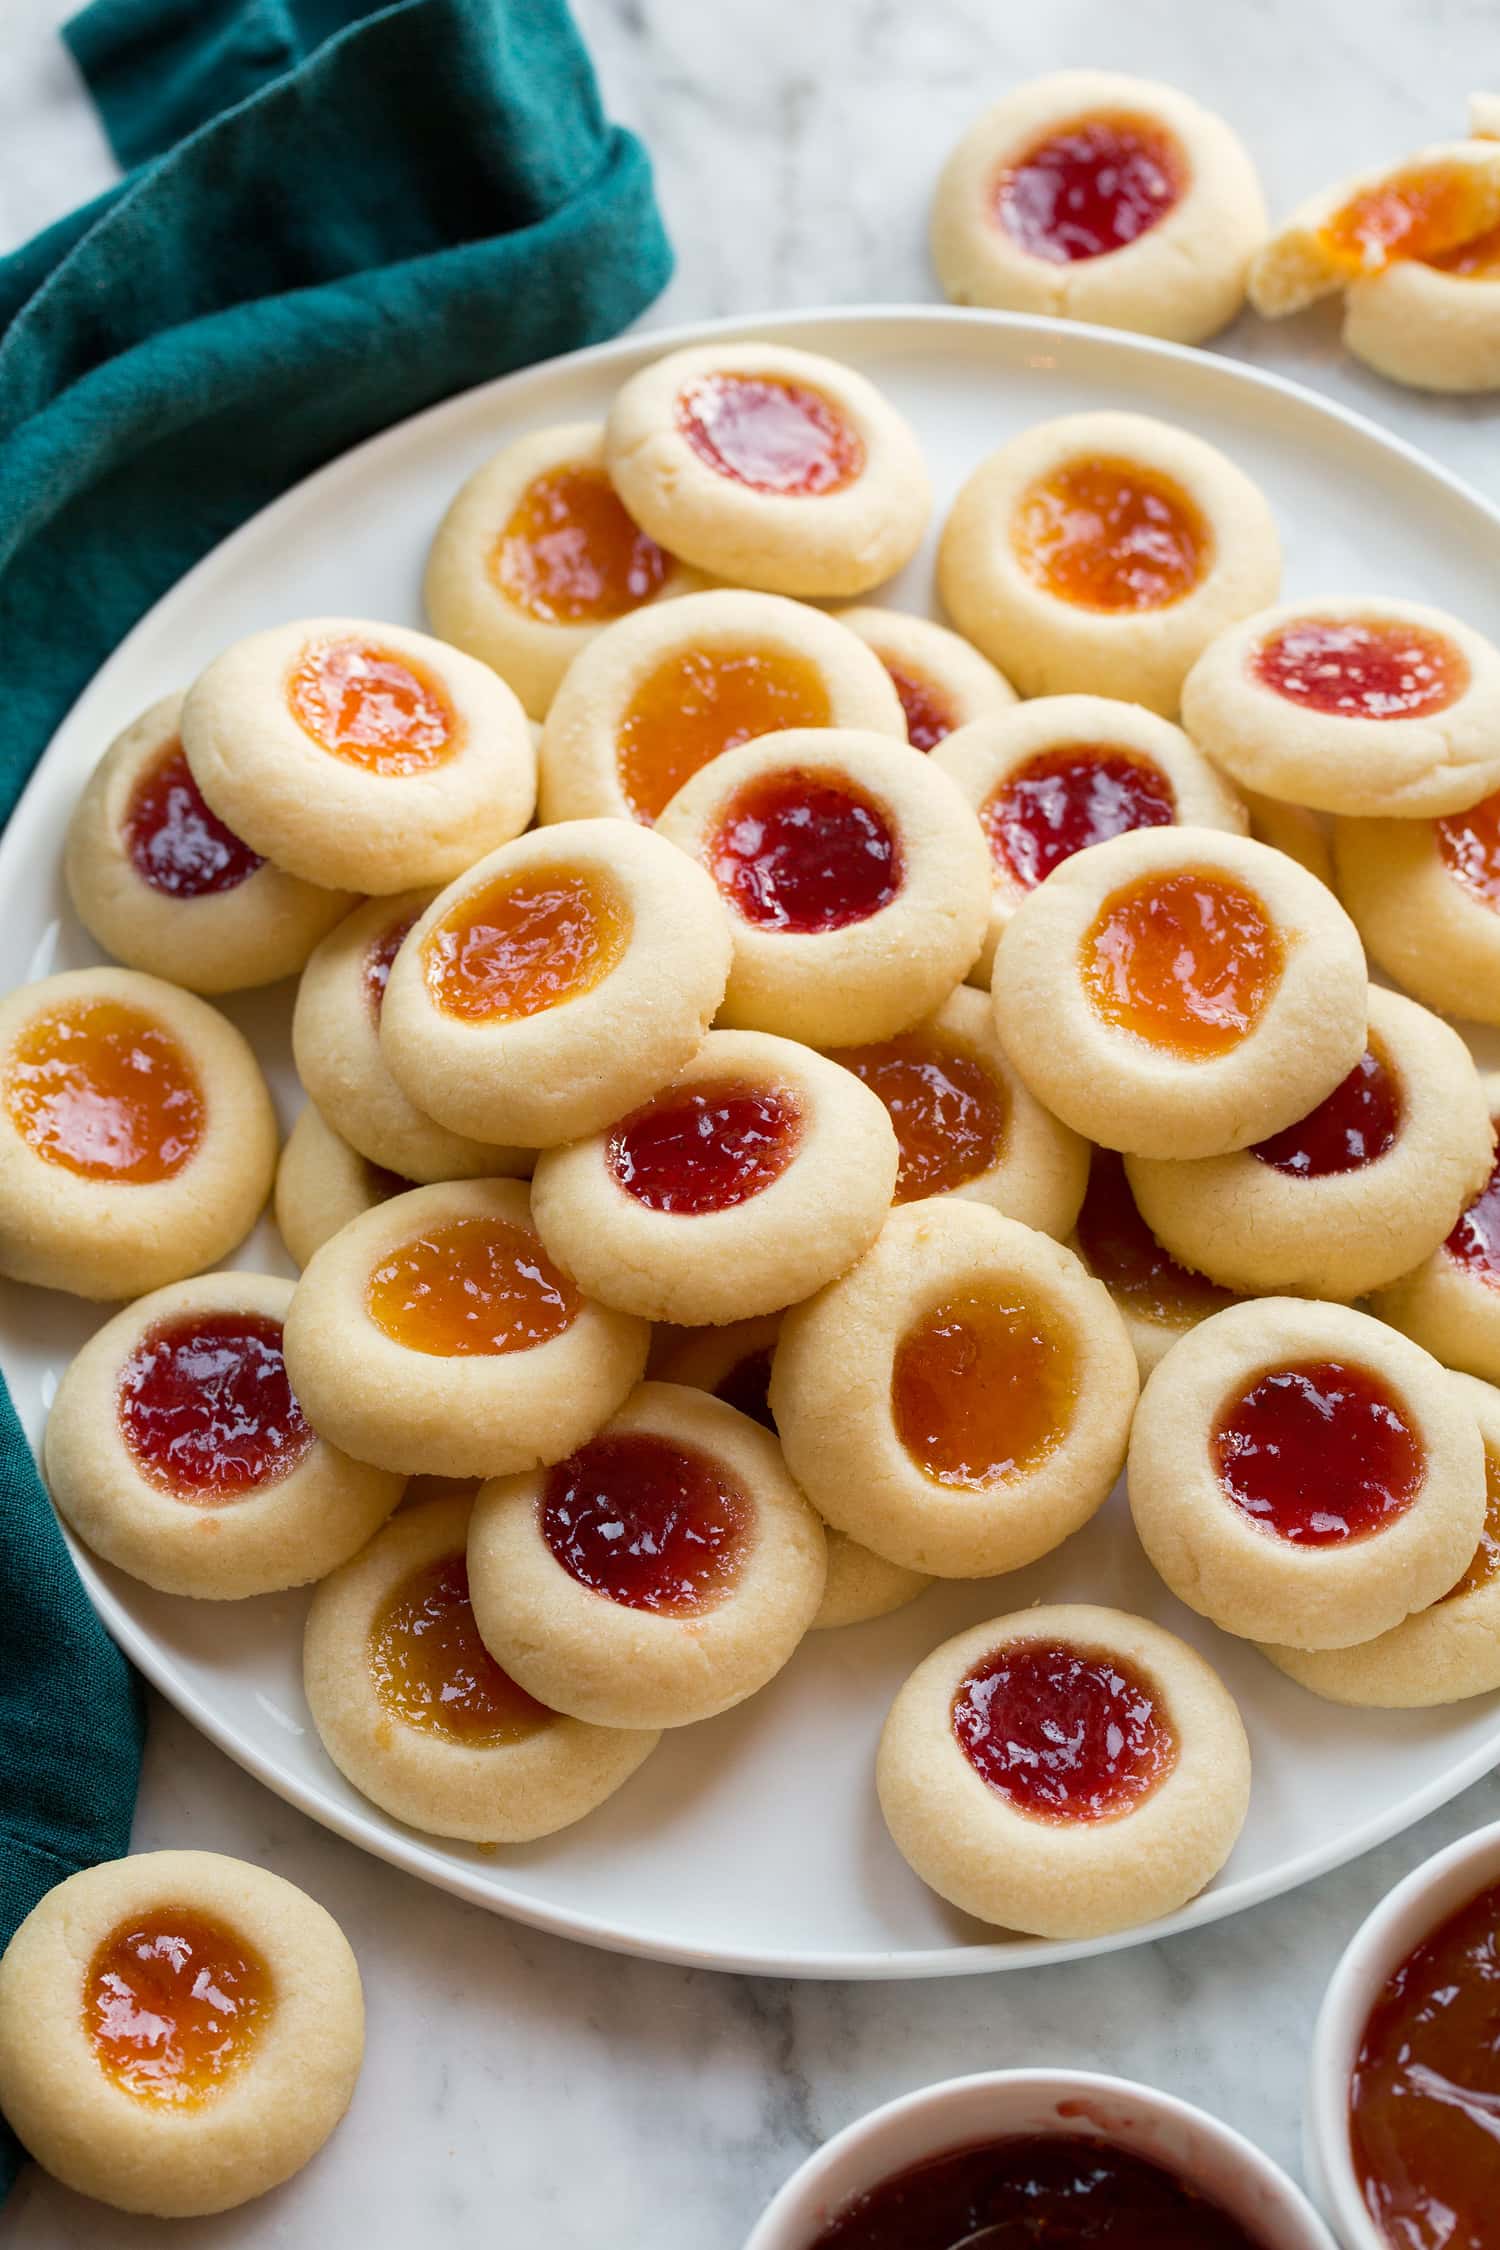 Homemade Thumbprint Cookies filled with apricot and strawberry jam.